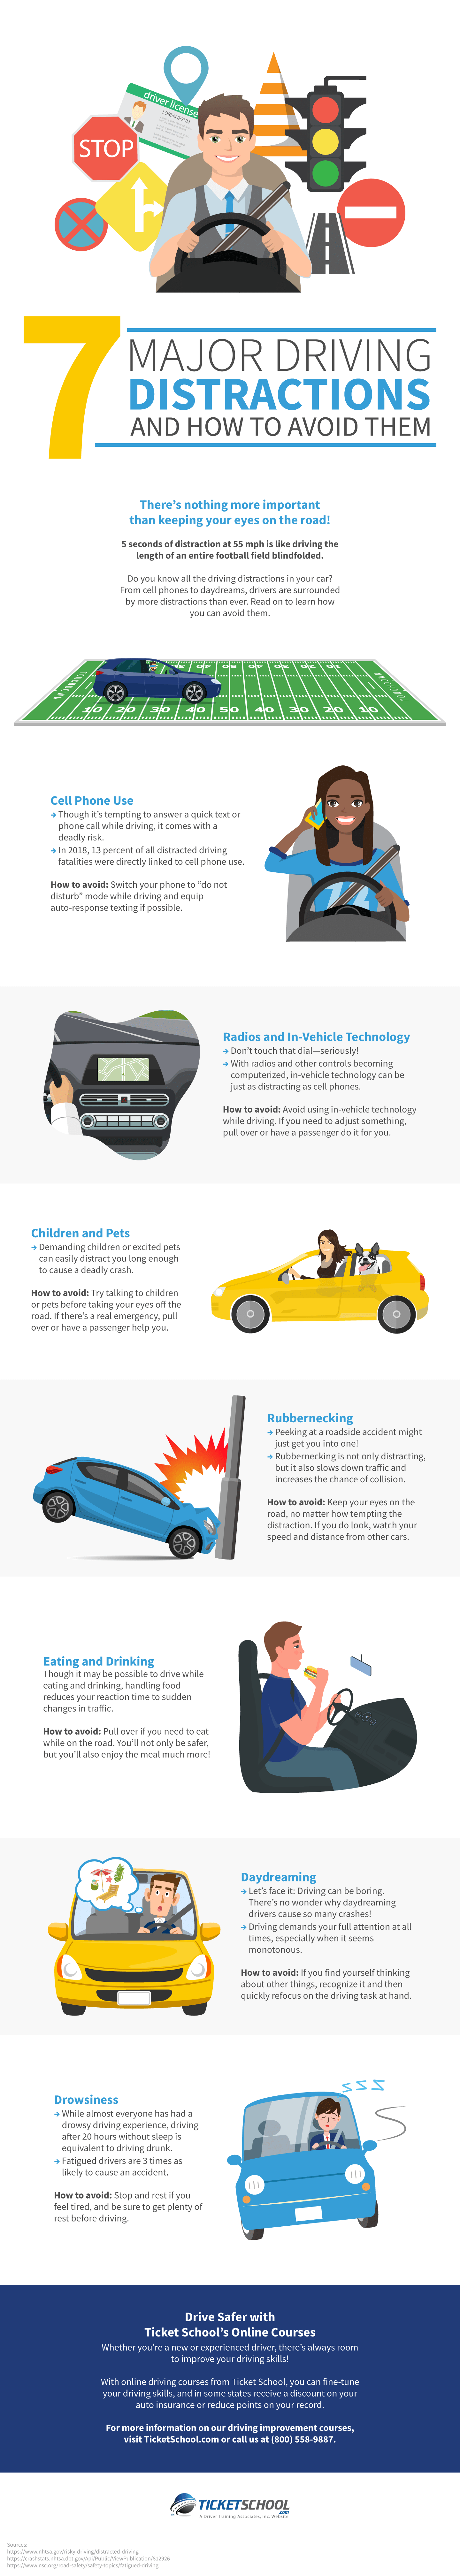 7 Major Driving Distractions and How to Avoid Them Infographic